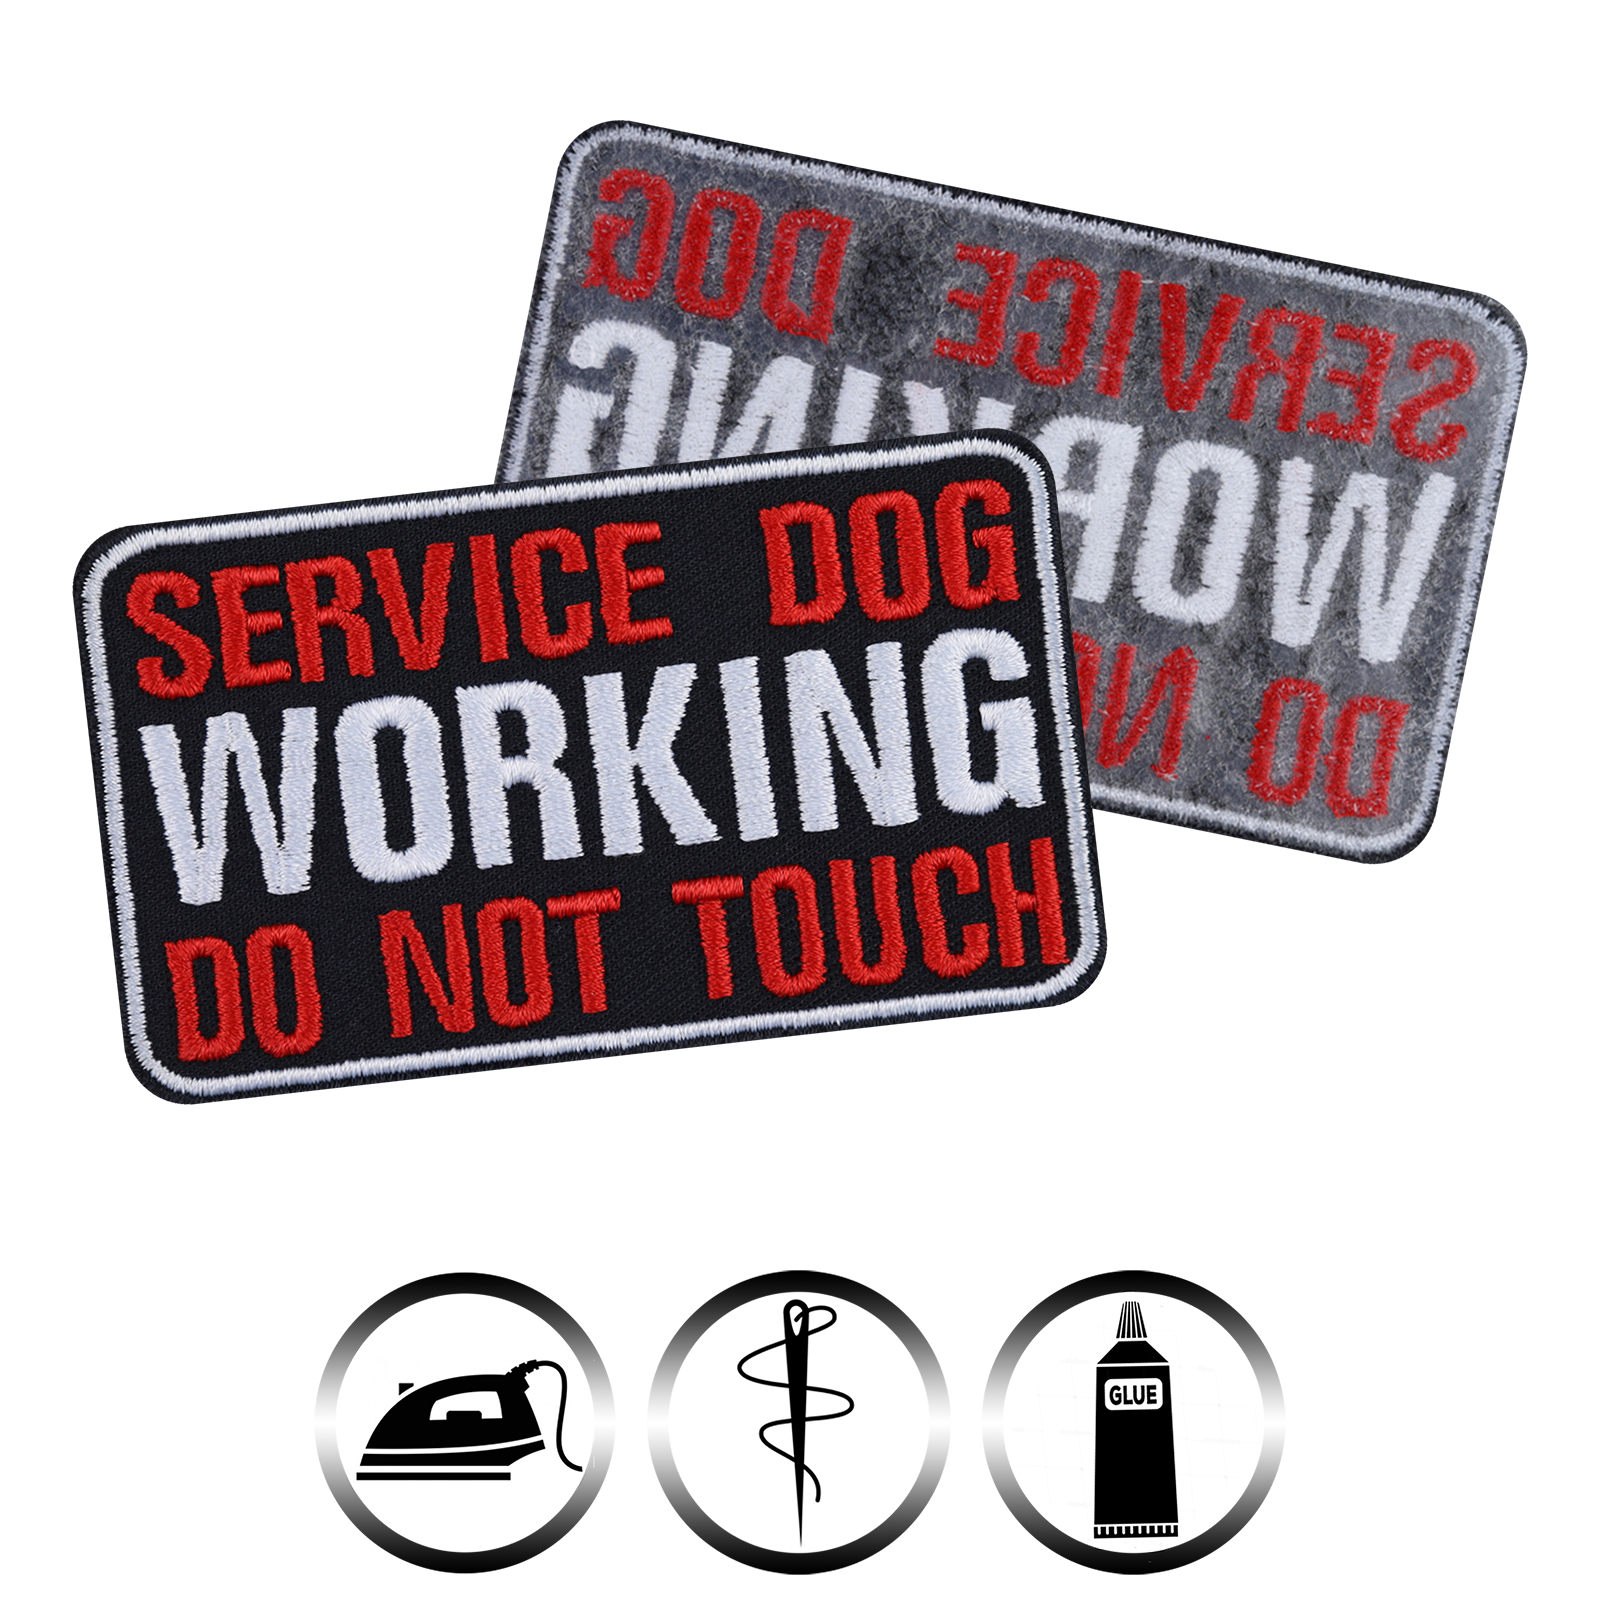 Service dog working - Do not touch - Patch